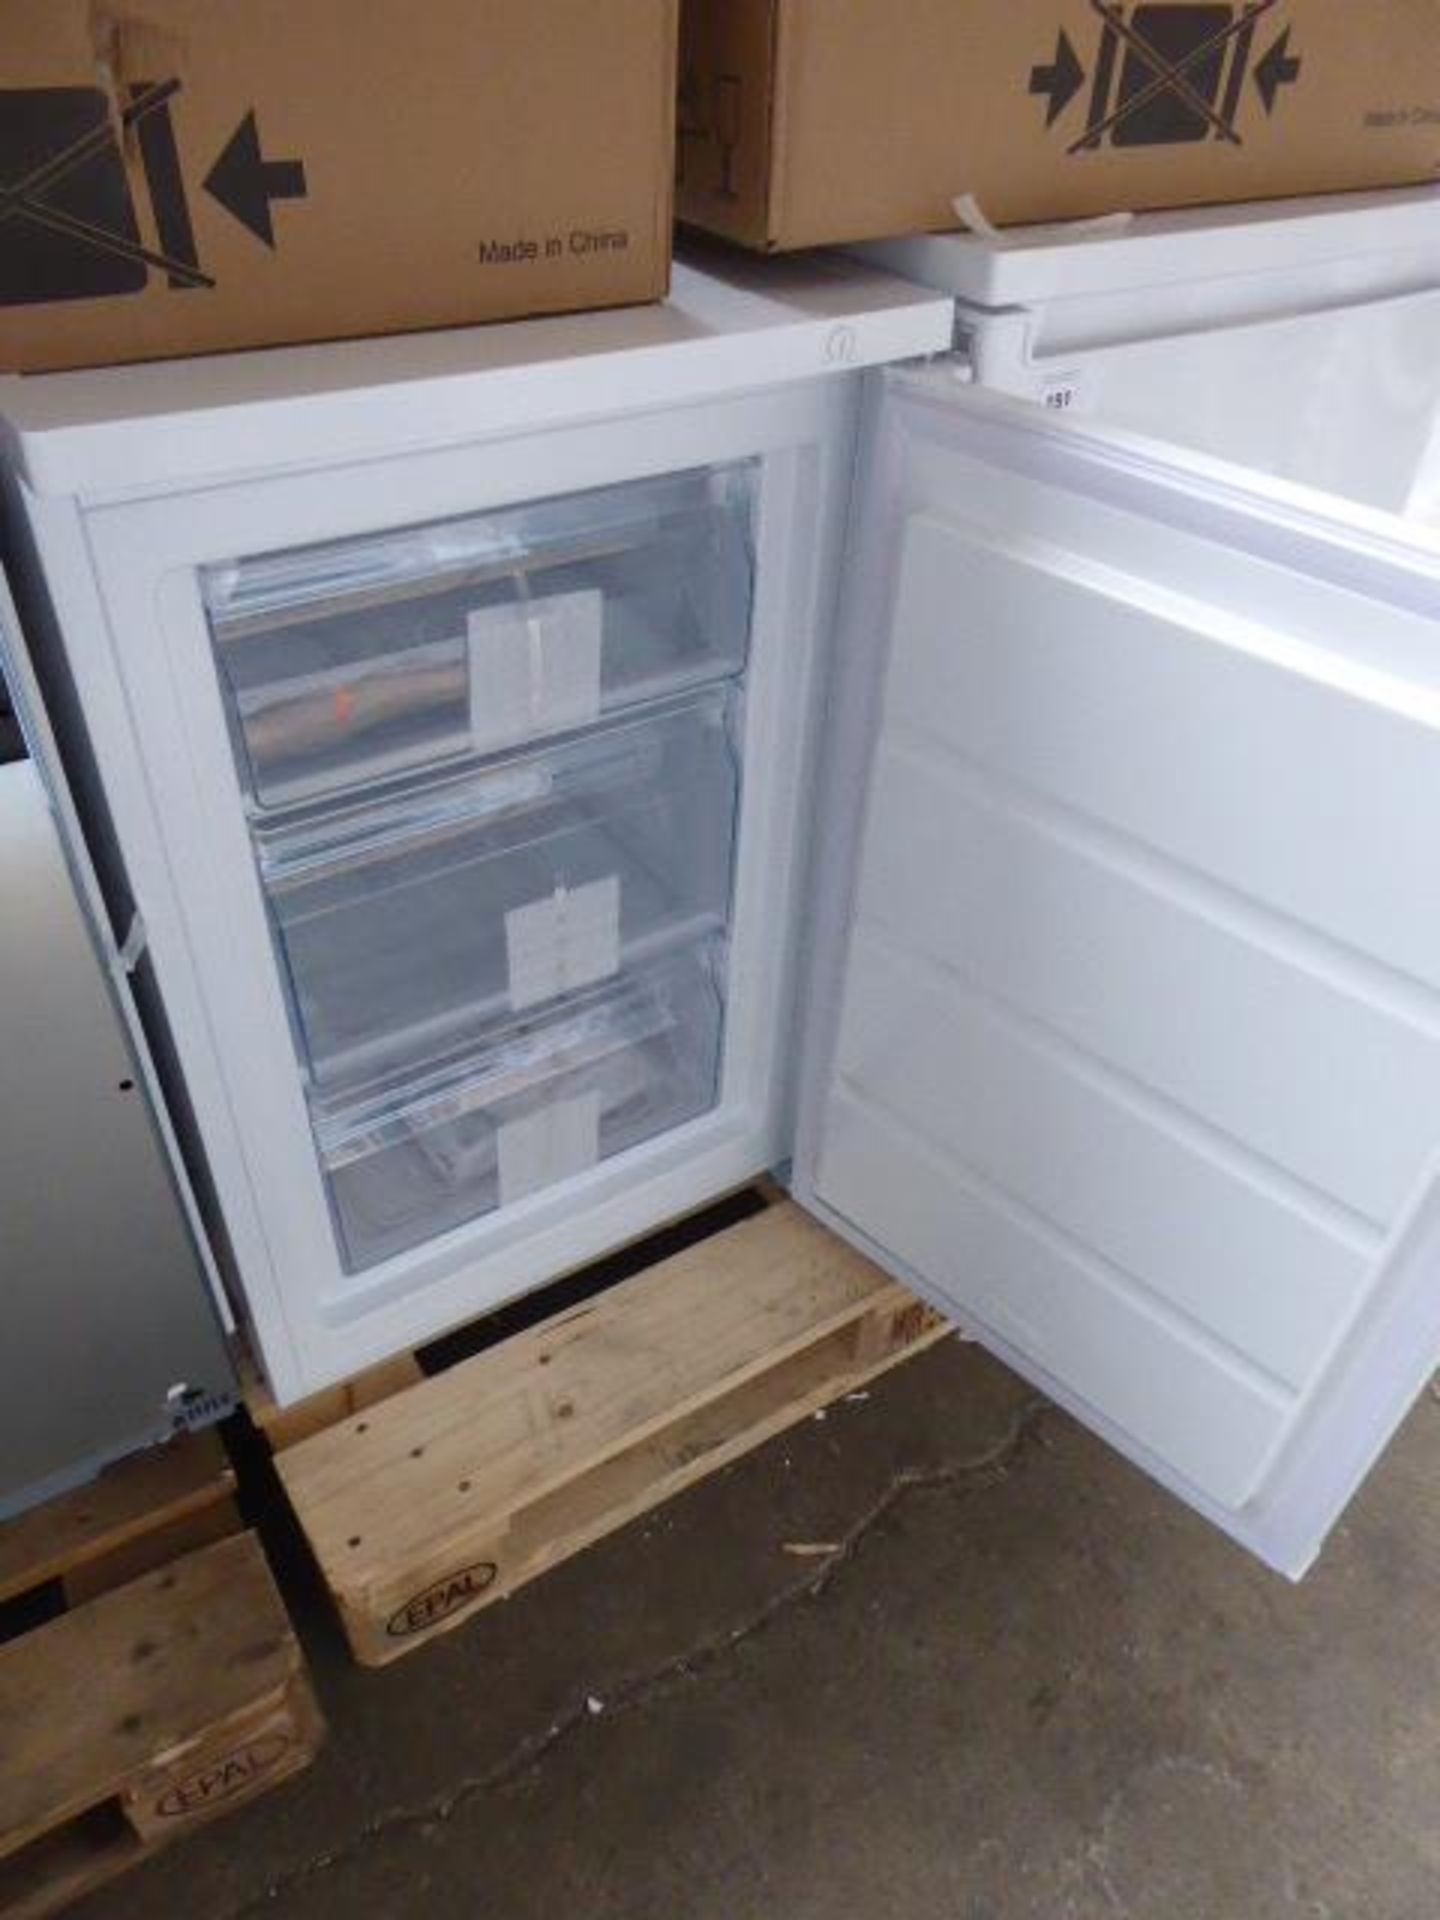 GTV15NWEAGB Bosch Tabletop upright freezer - Image 2 of 2